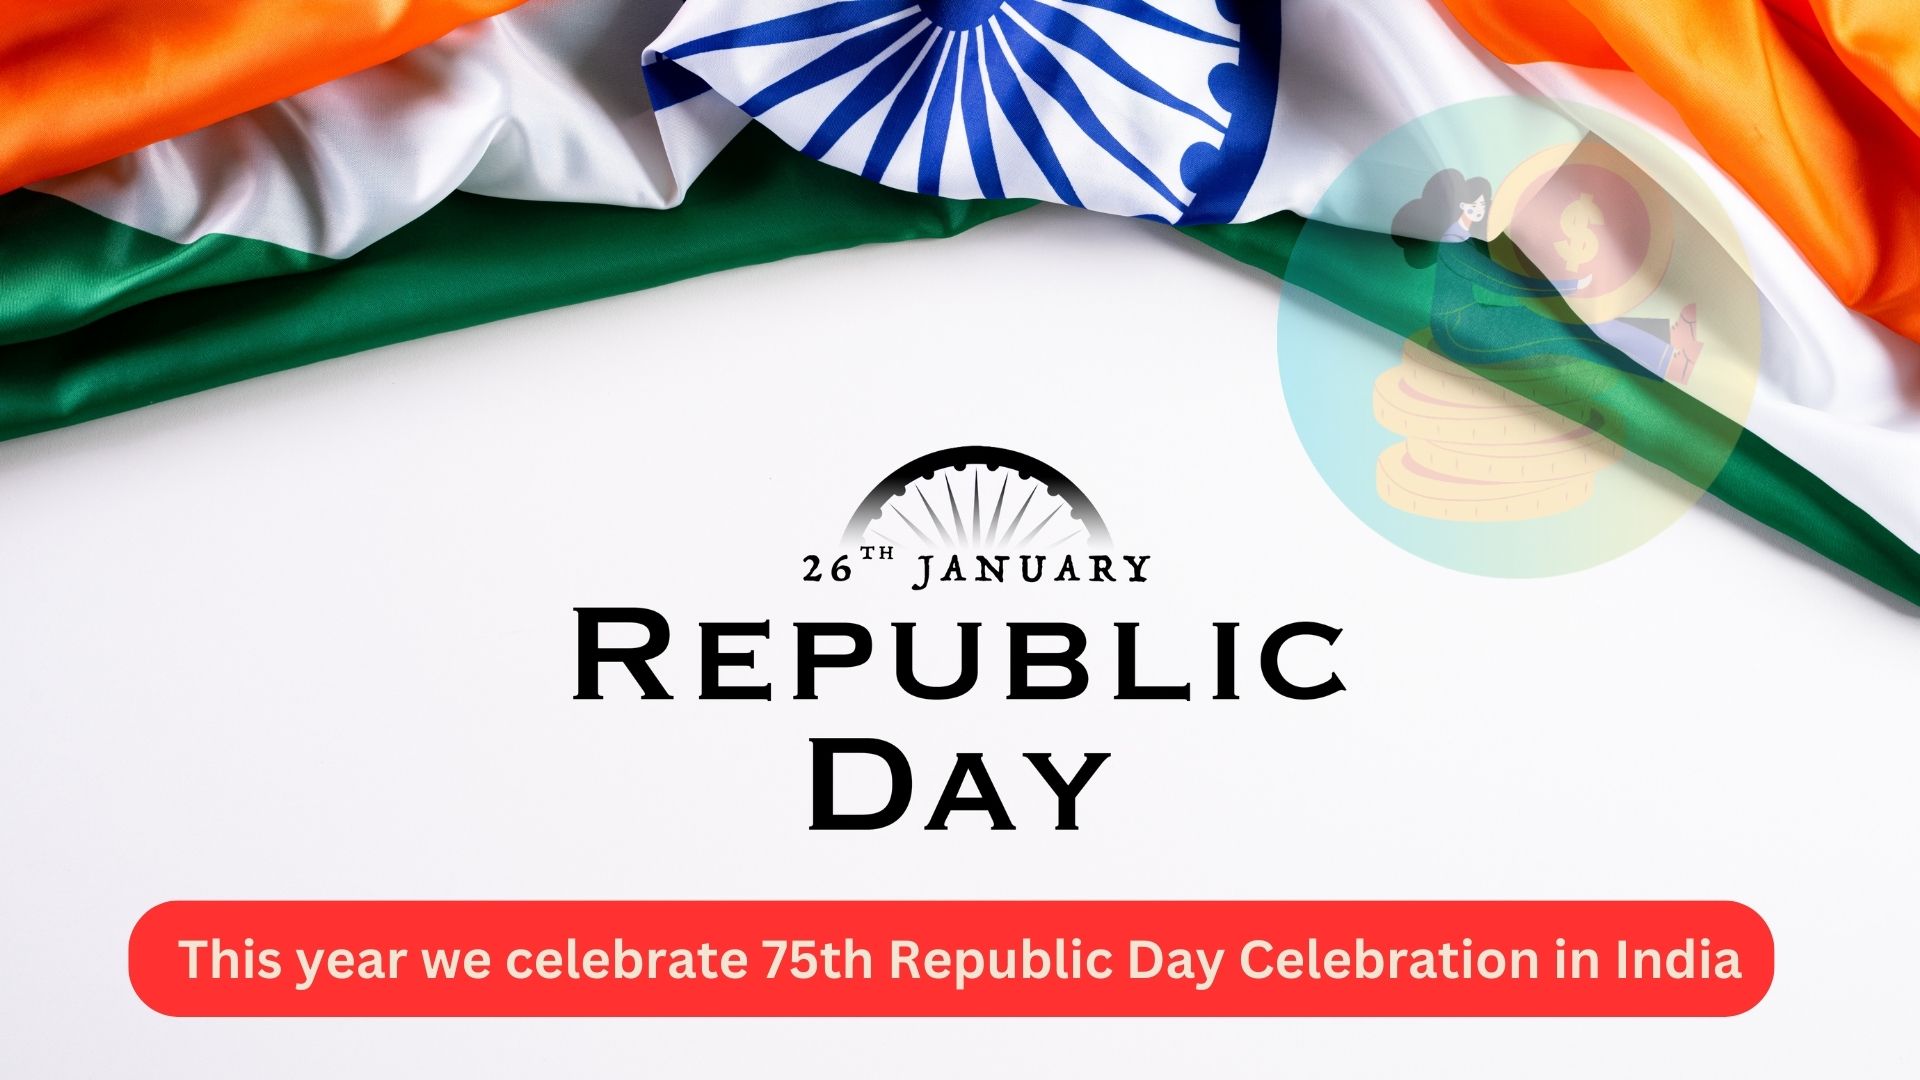 This year we celebrate 75th Republic Day Celebration in India